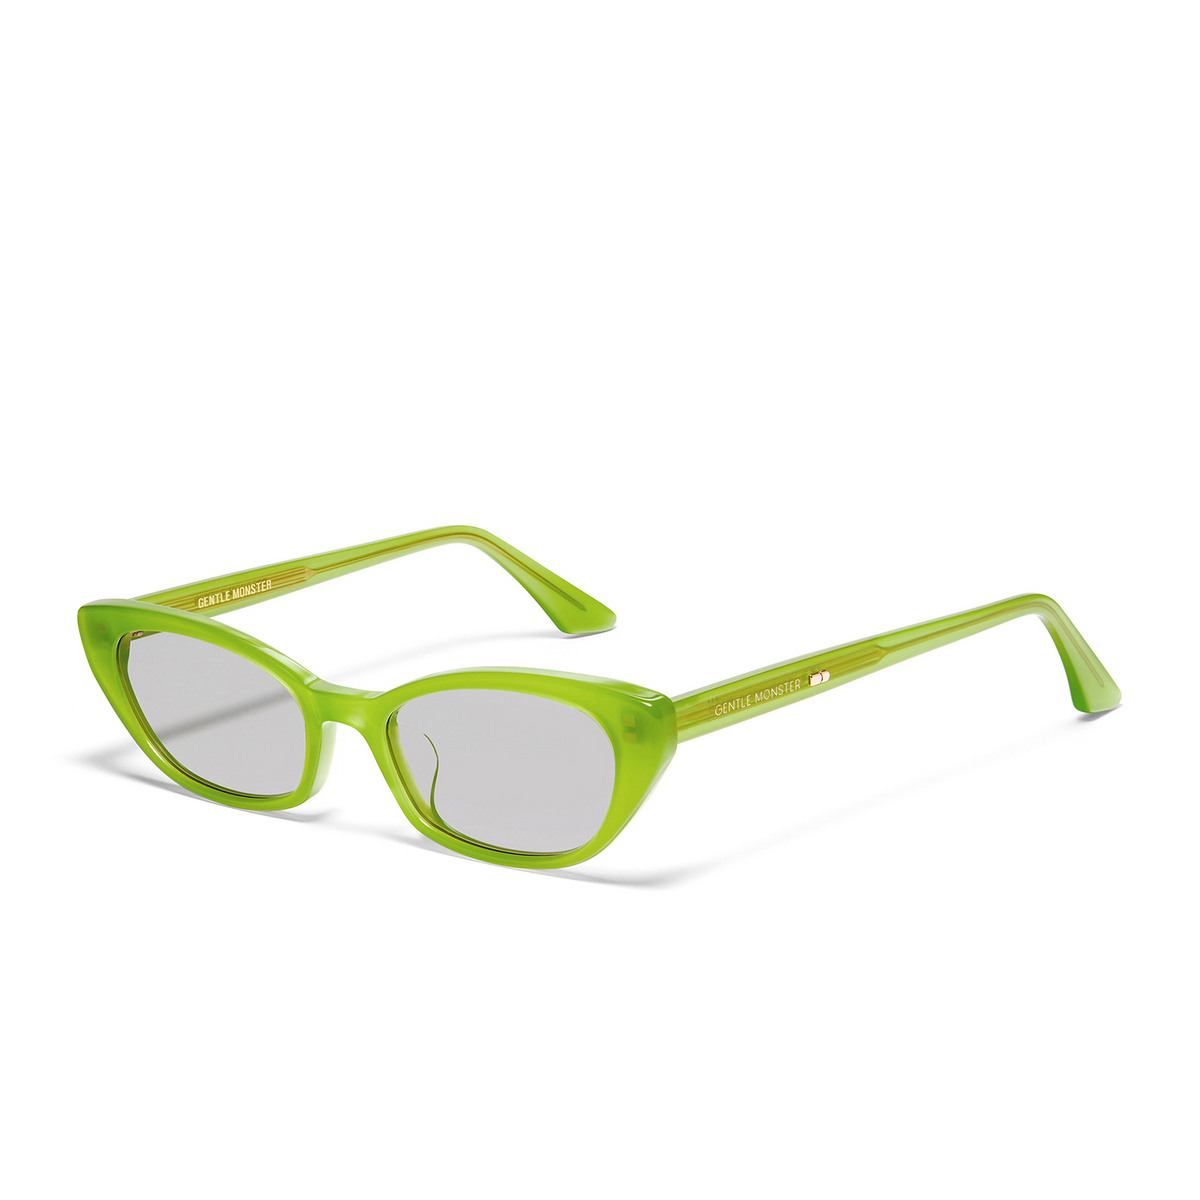 Gentle Monster® Oval Sunglasses: Pesh color Green GR3 - three-quarters view.